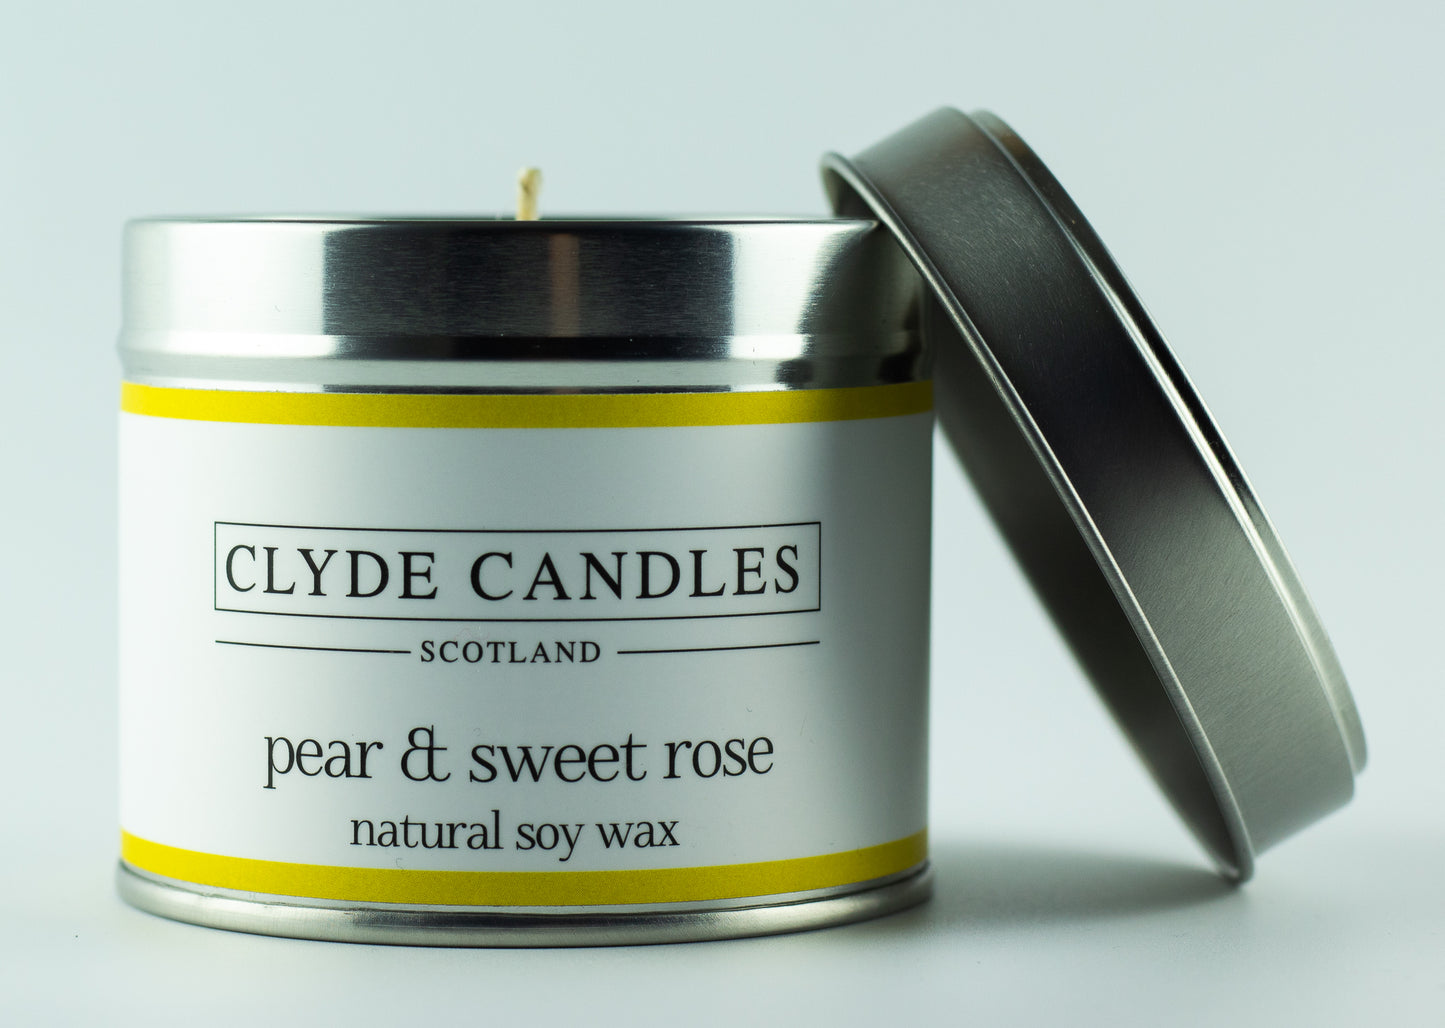 Clyde candles pear and sweet rose, hand made soy candle made in scotland